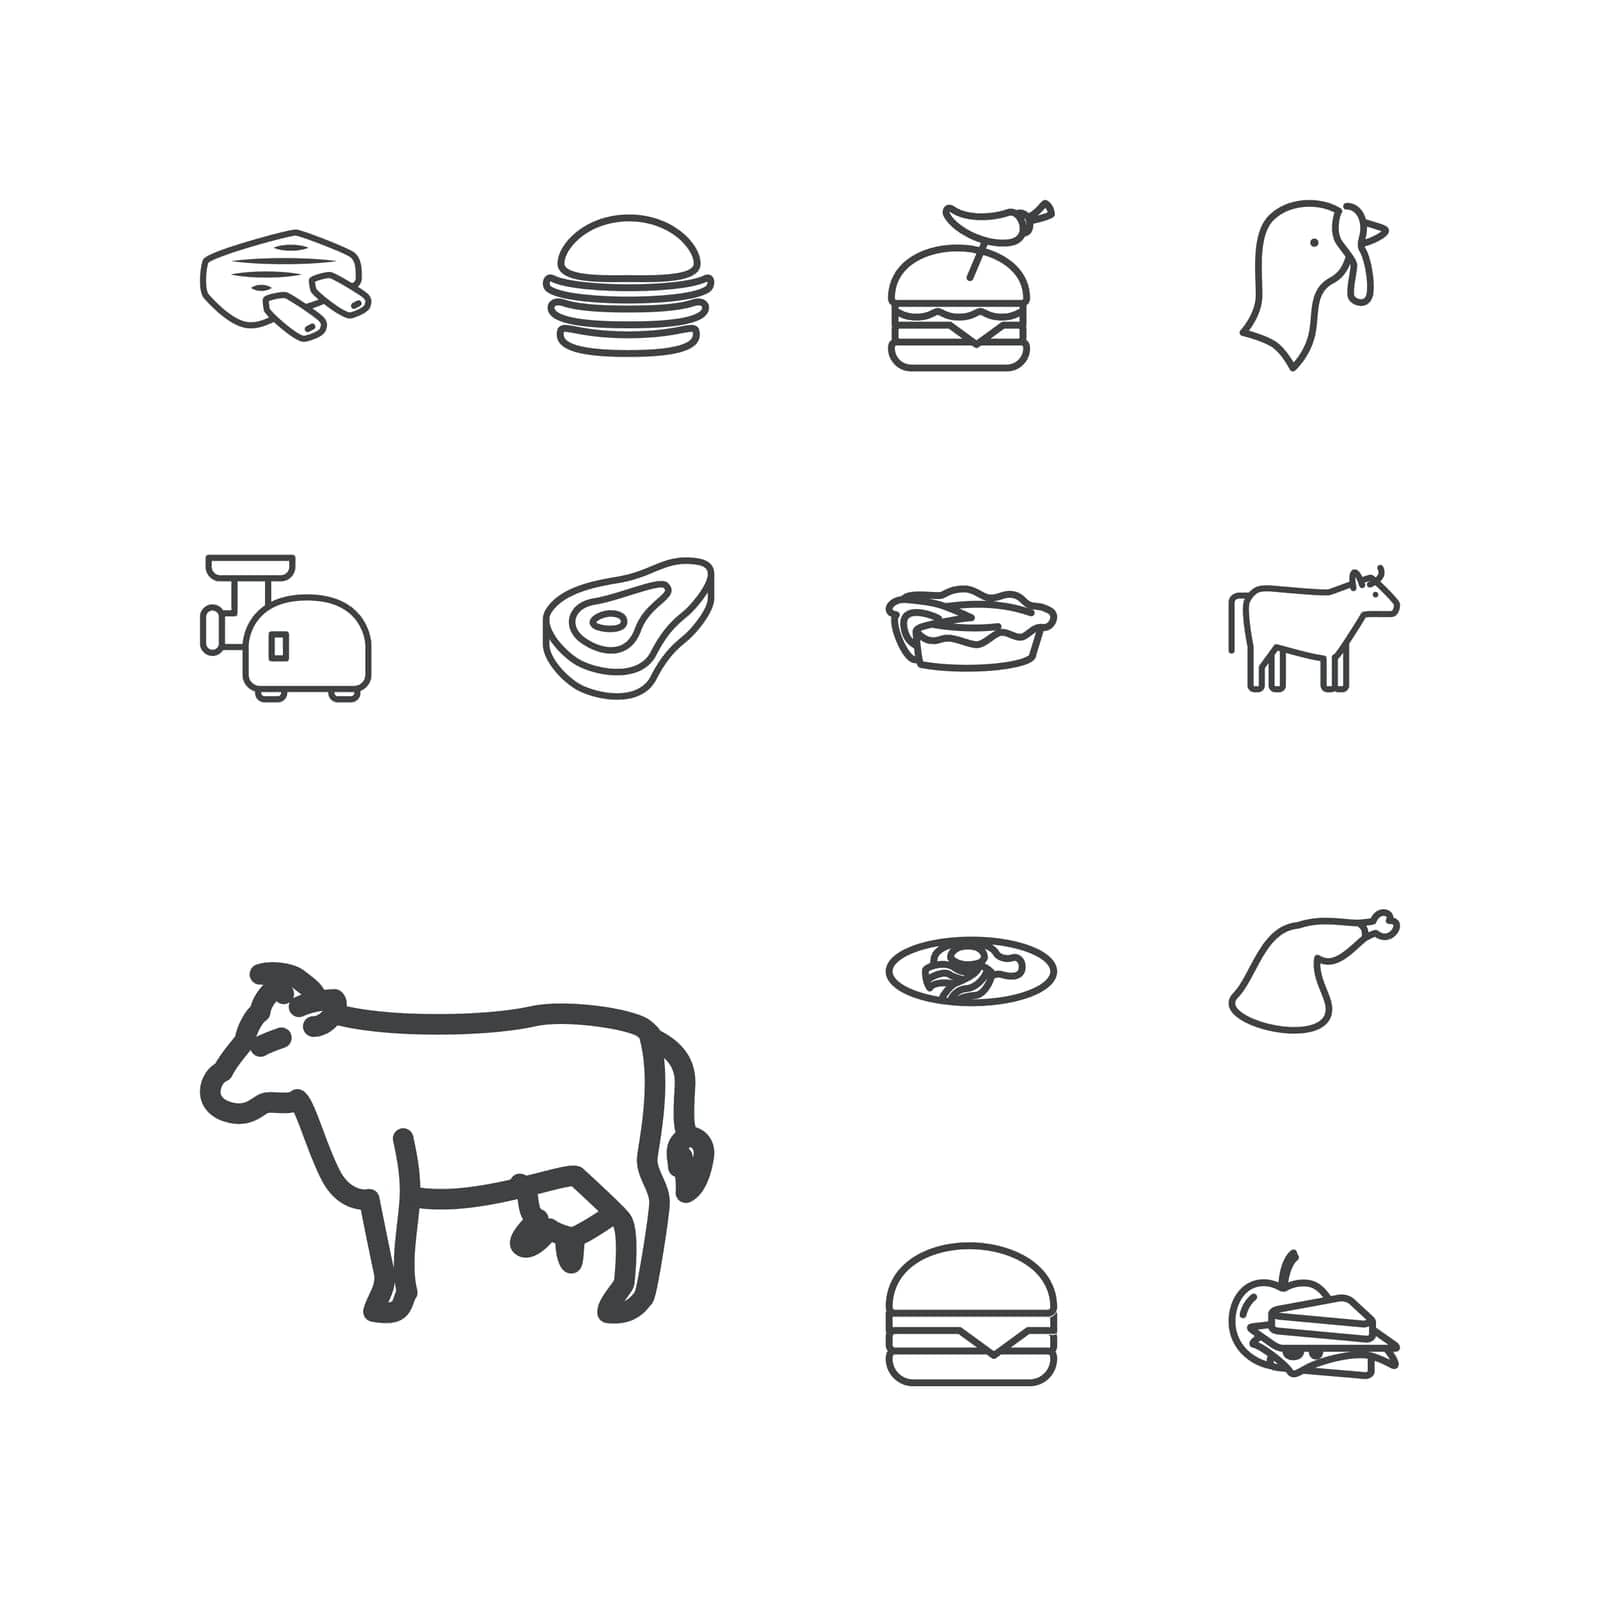 pepper,symbol,lunch,egg,icon,sign,isolated,beef,cow,pie,leg,cheese,apple,white,burger,and,design,vector,graphic,element,art,set,grinder,black,sandwich,food,fried,meal,bacon,with,nutrition,background,turkey,silhouette,meat,animal,illustration,cheeseburger,object by ogqcorp